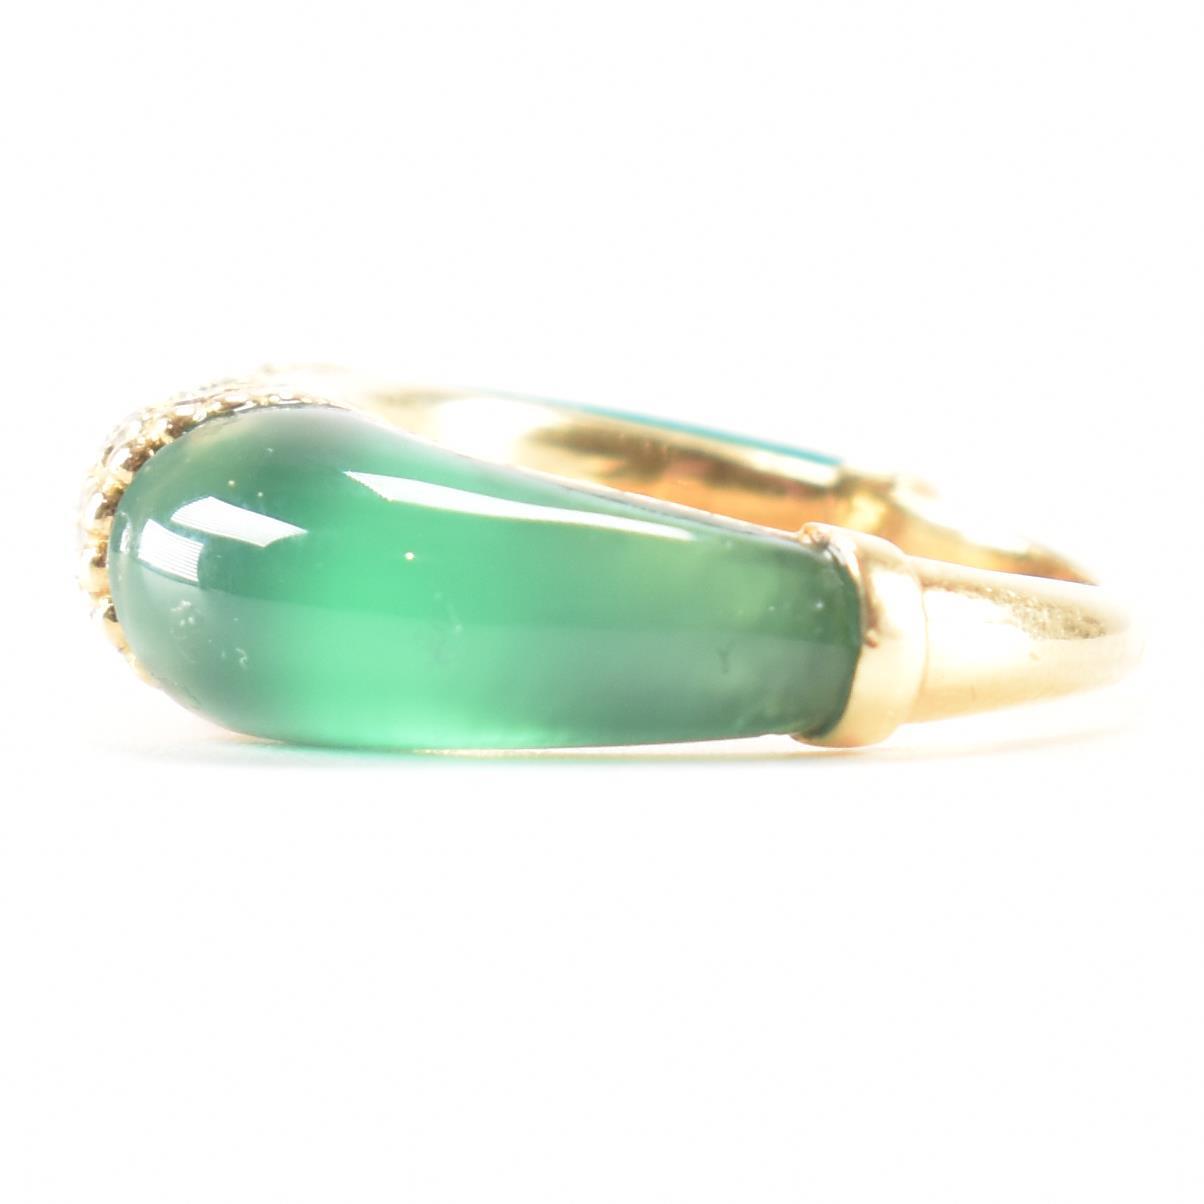 FRENCH GOLD CHALCEDONY & DIAMOND RING - Image 3 of 9